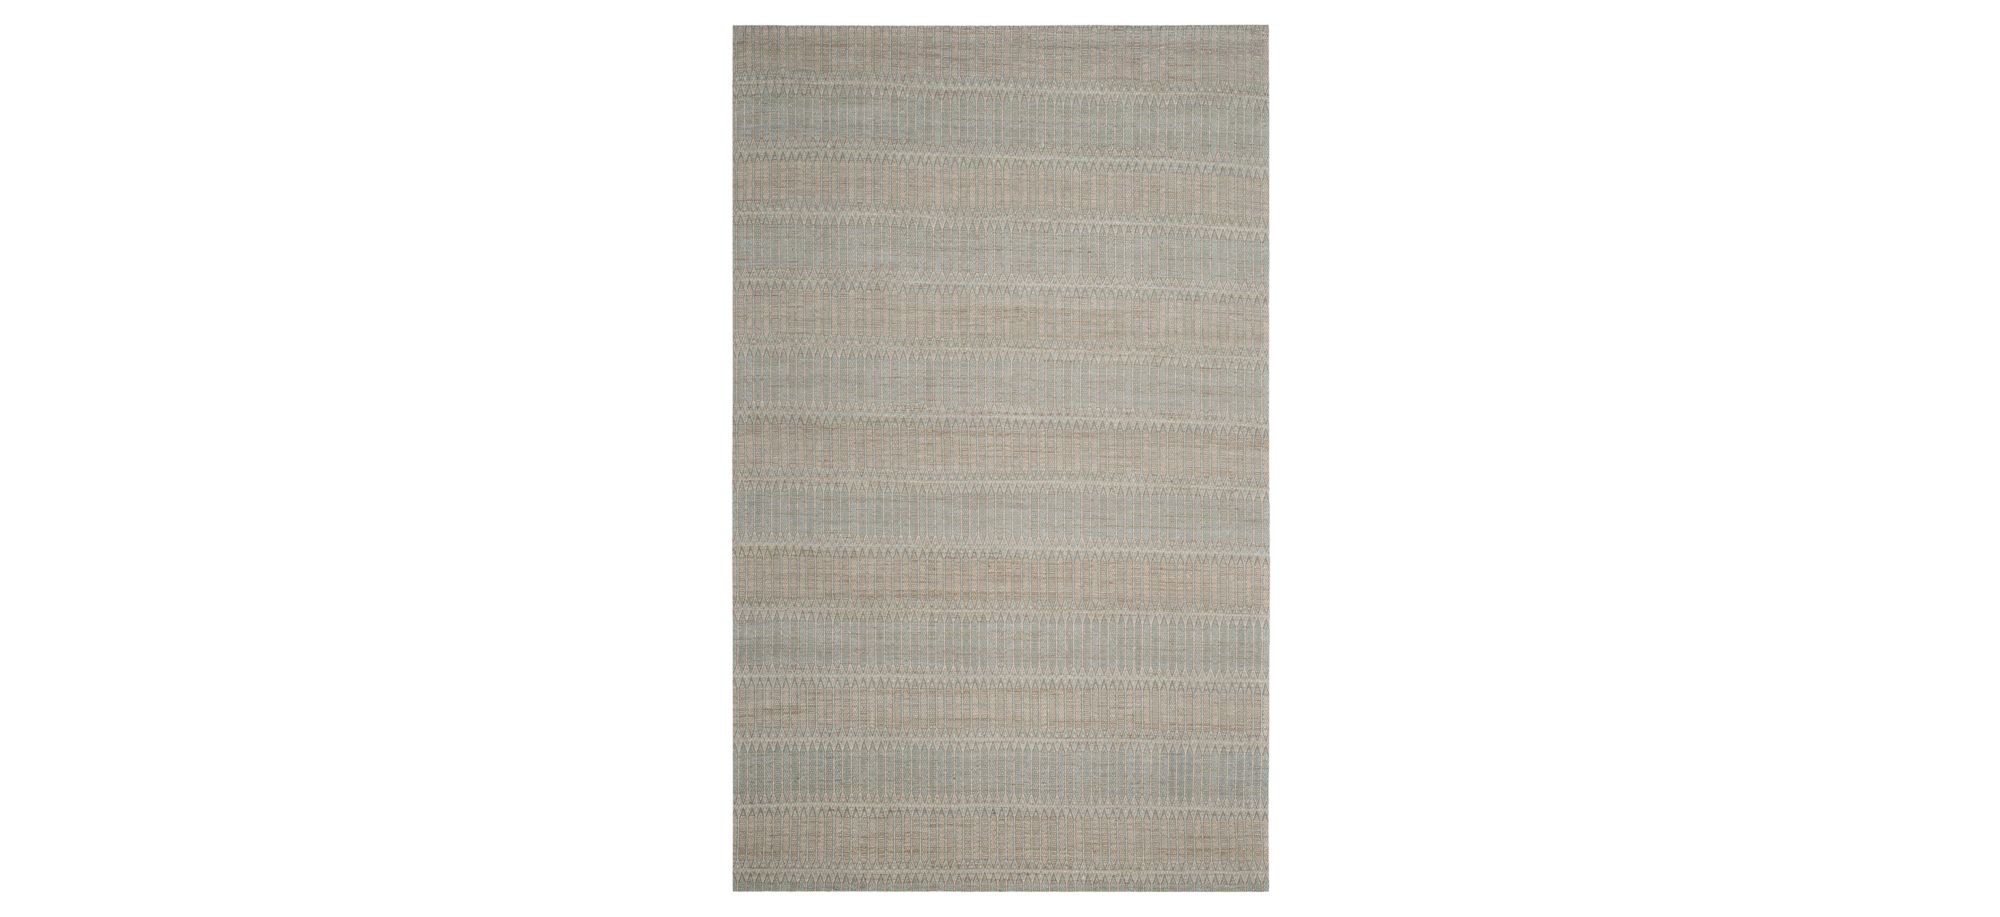 Marbella I Area Rug in Blue/Gold by Safavieh